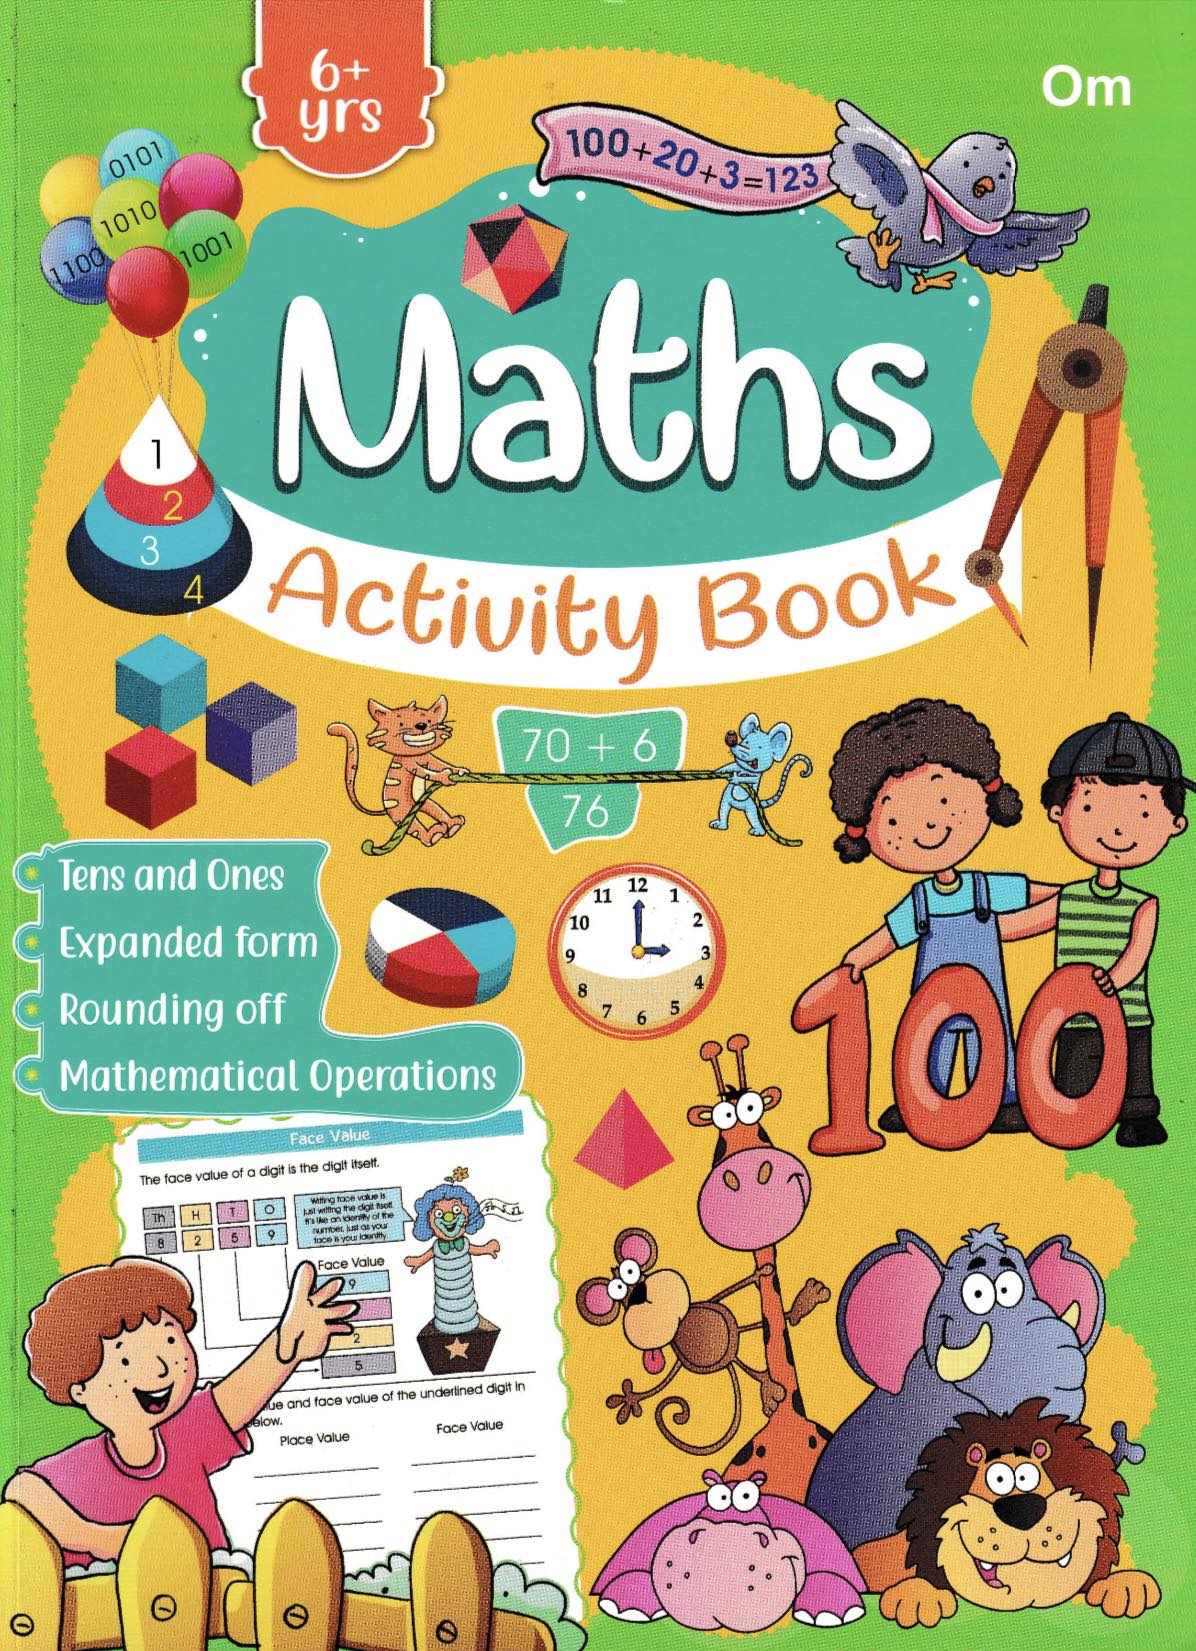 Maths Activity Book for Age 6+